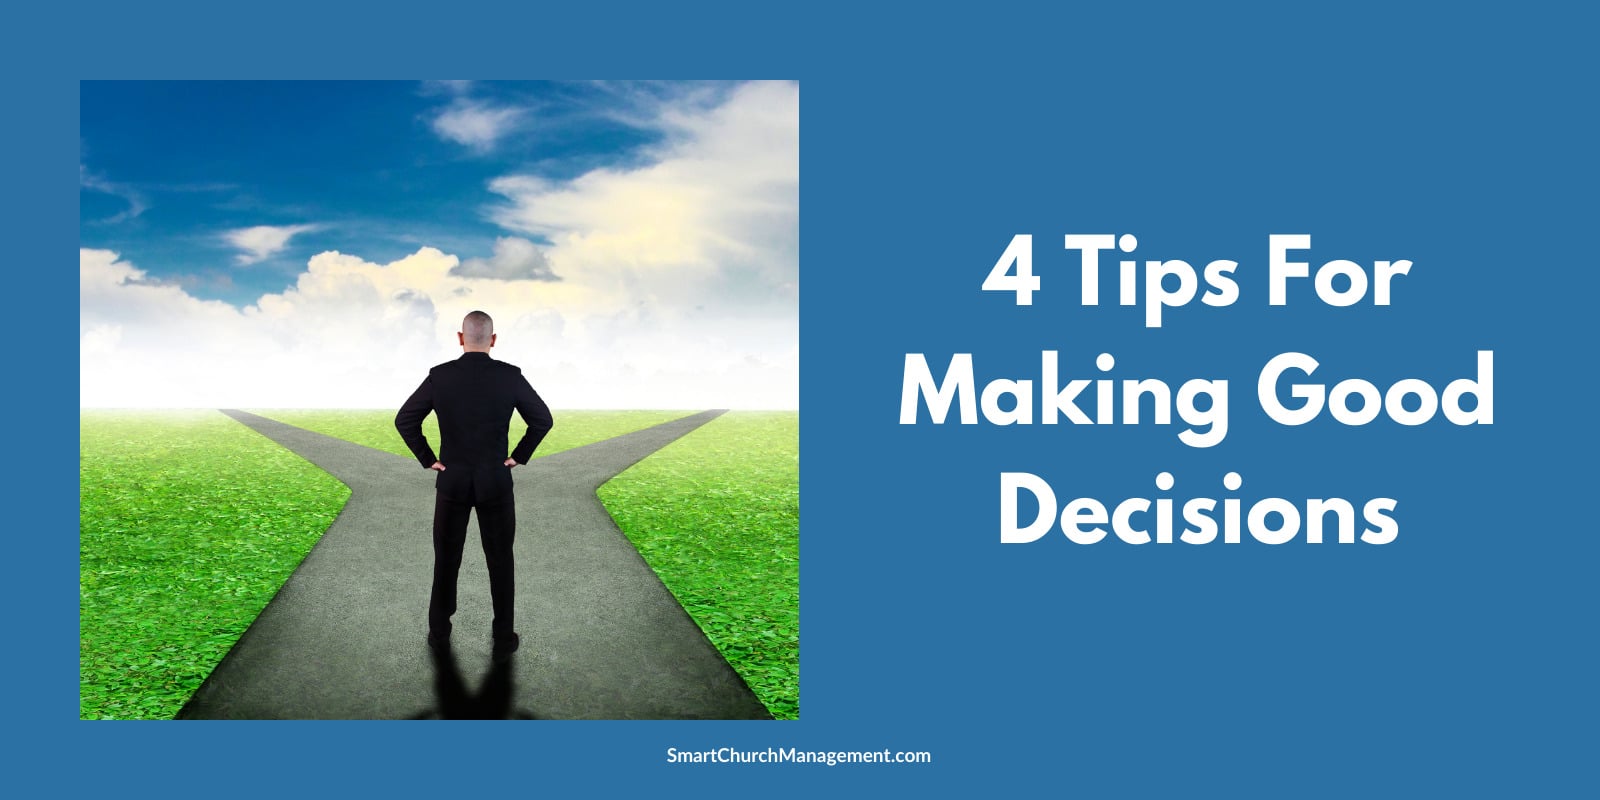 Tips for making good decisions